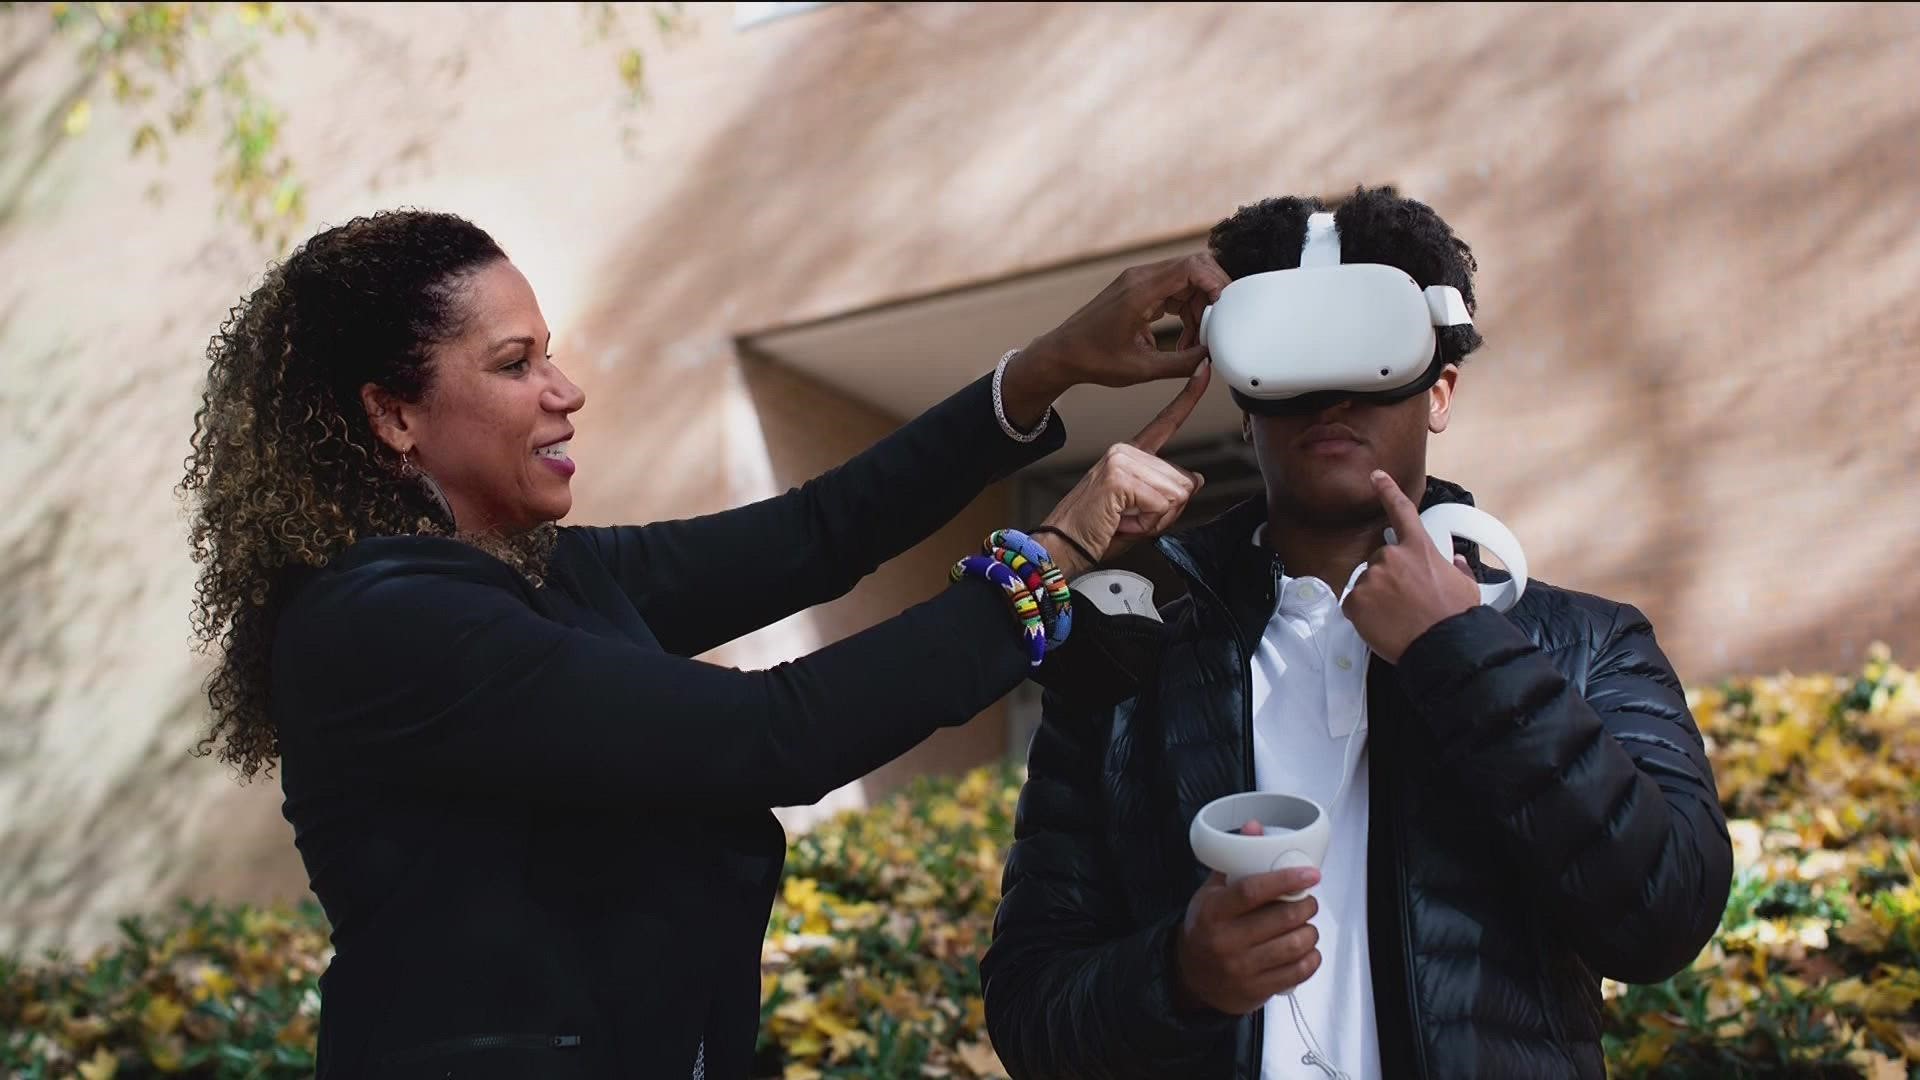 At Morehouse College, virtual reality has become the classroom. The Atlanta HBU now offers classes in the metaverse.